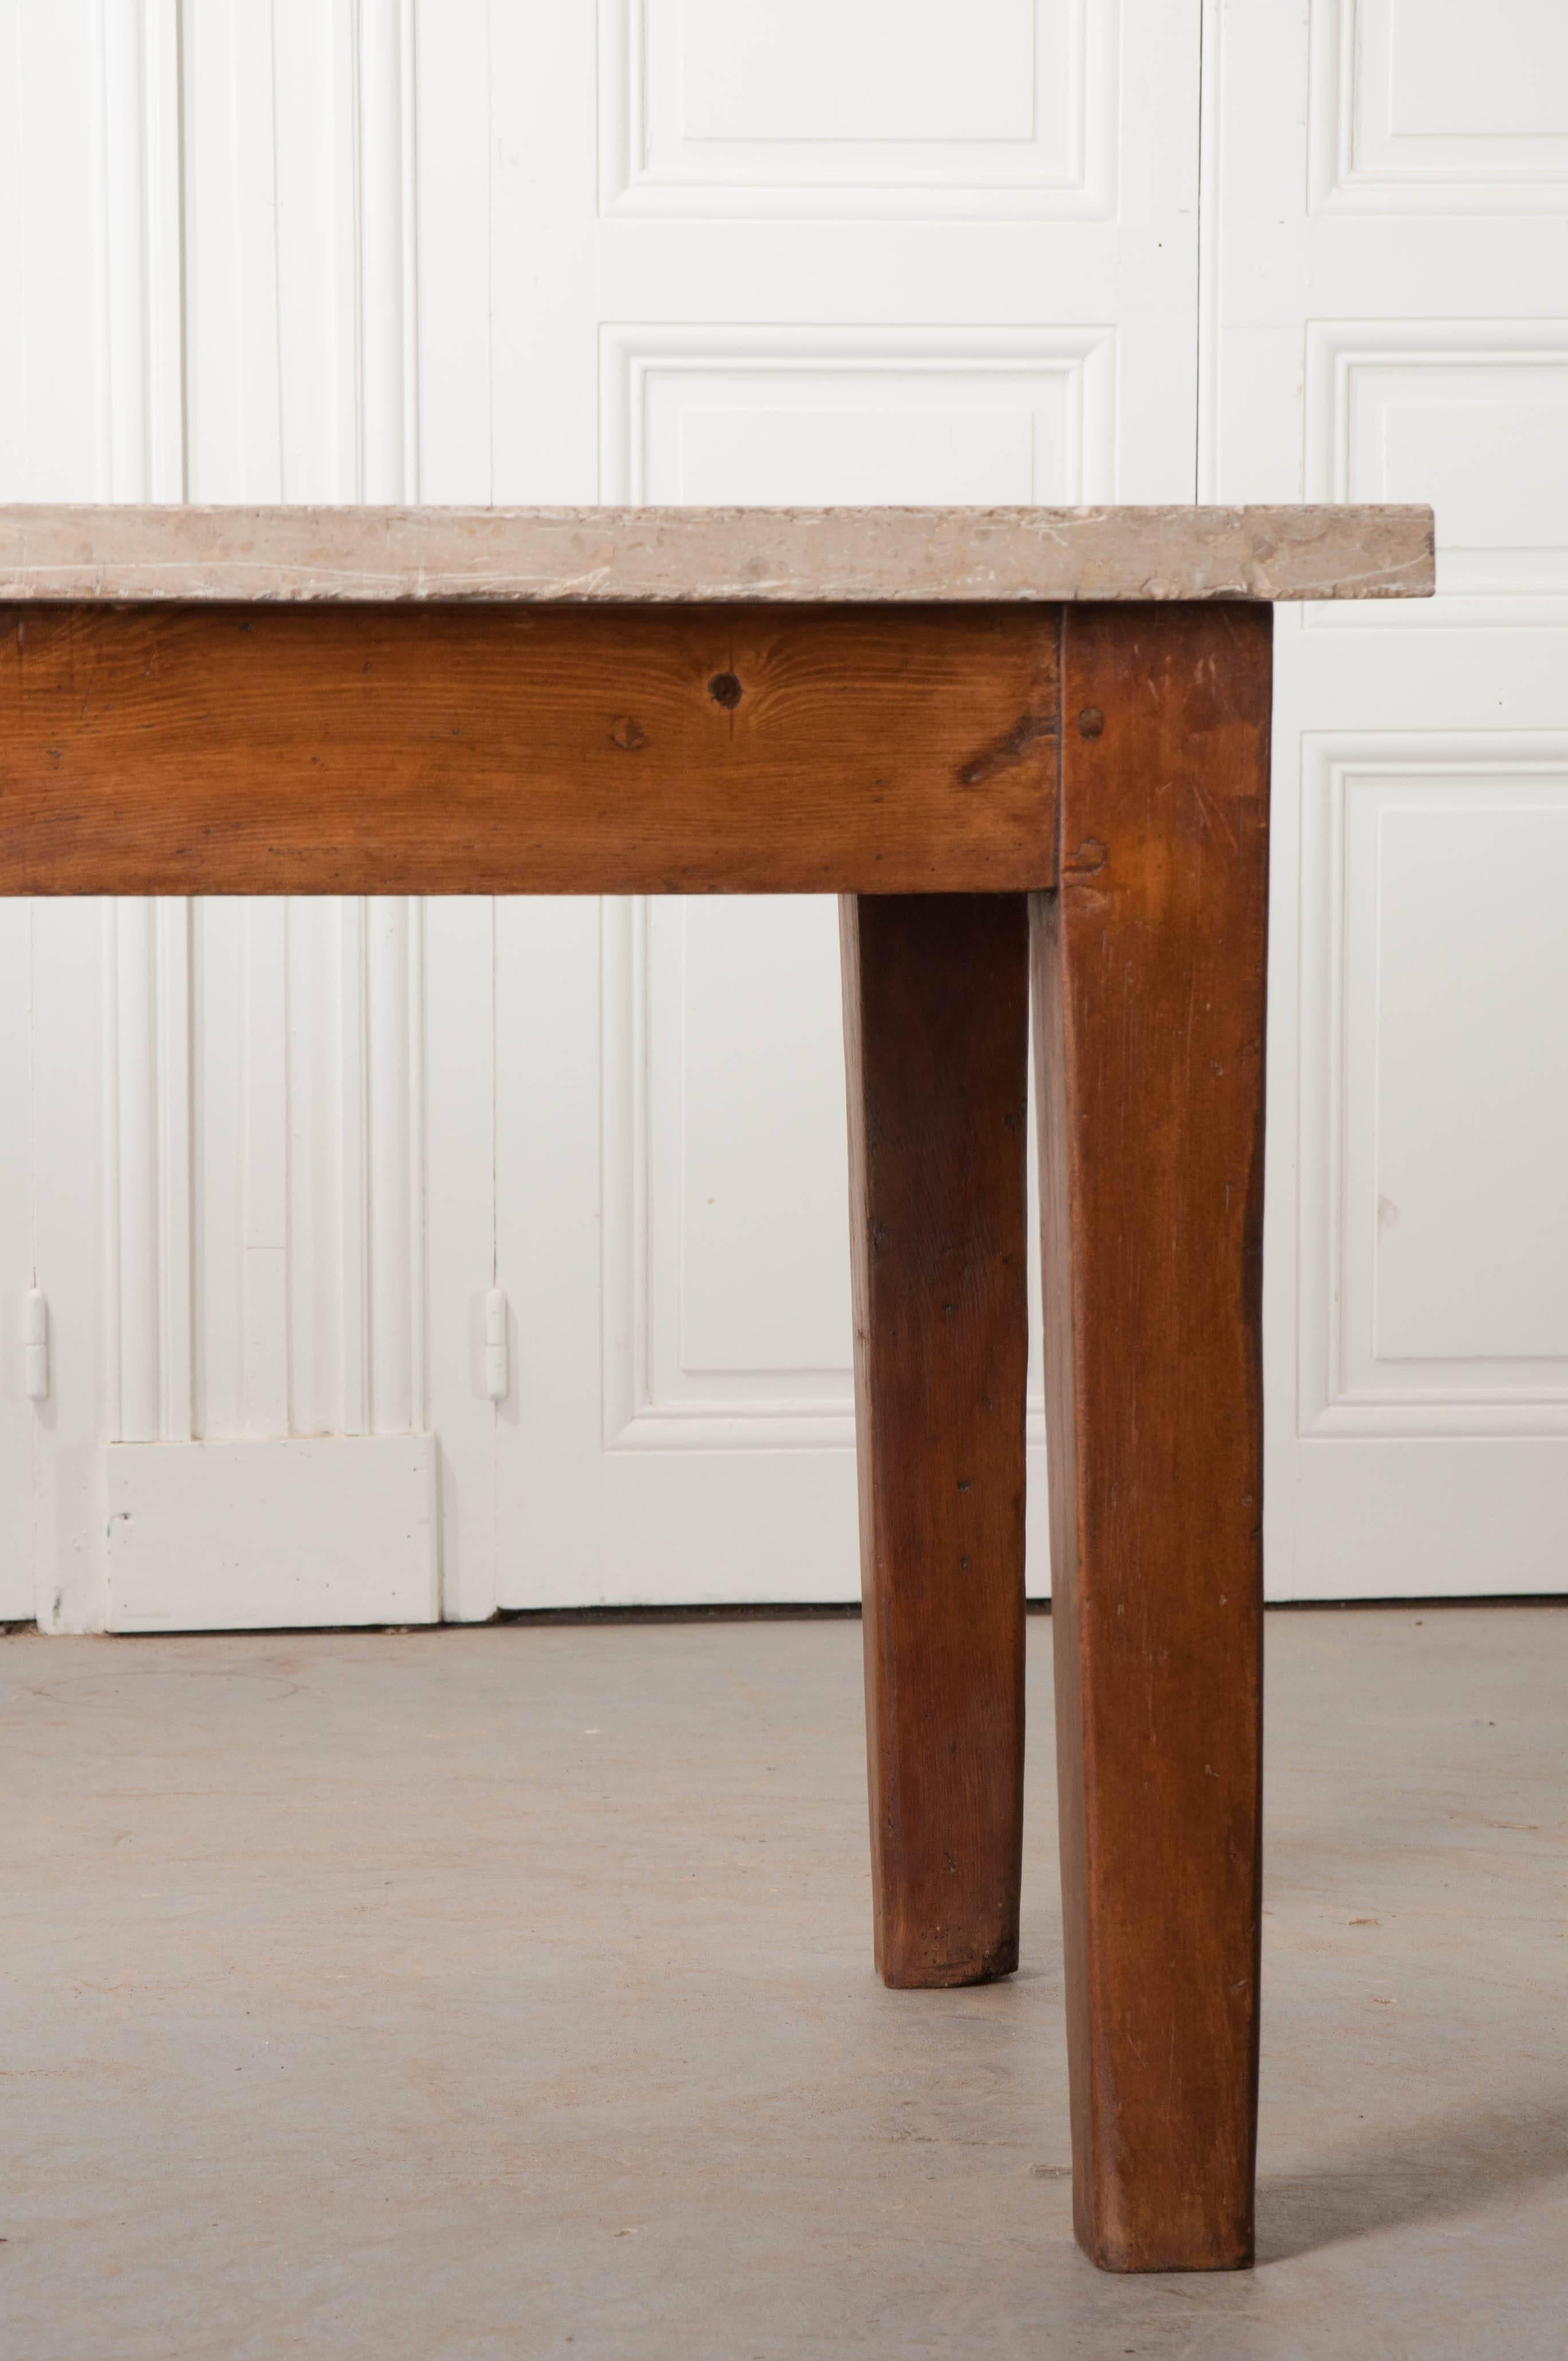 This hefty table comes from France, and was made towards the end of the 19th century. The table’s top is a large, thick slab of taupe-colored limestone that has been polished, with the edges left somewhat live. It is held up by a solid-pine base